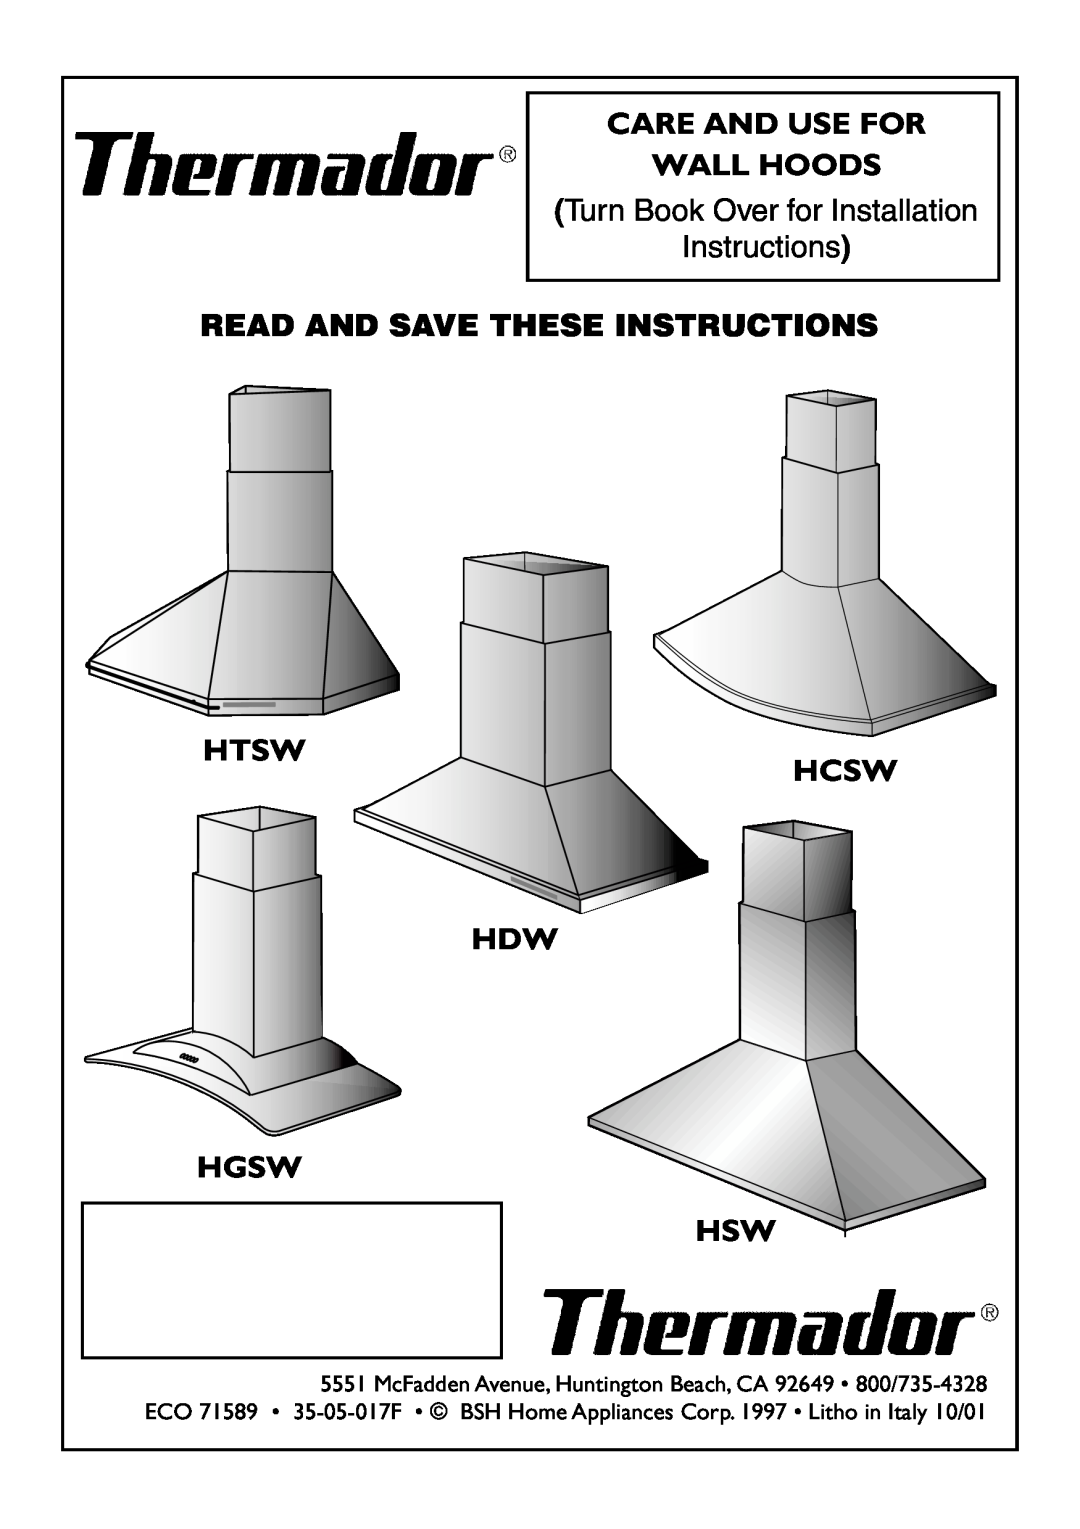 Thermador HCSW installation instructions Care And Use For, Wall Hoods, Turn Book Over for Installation, Instructions, Htsw 